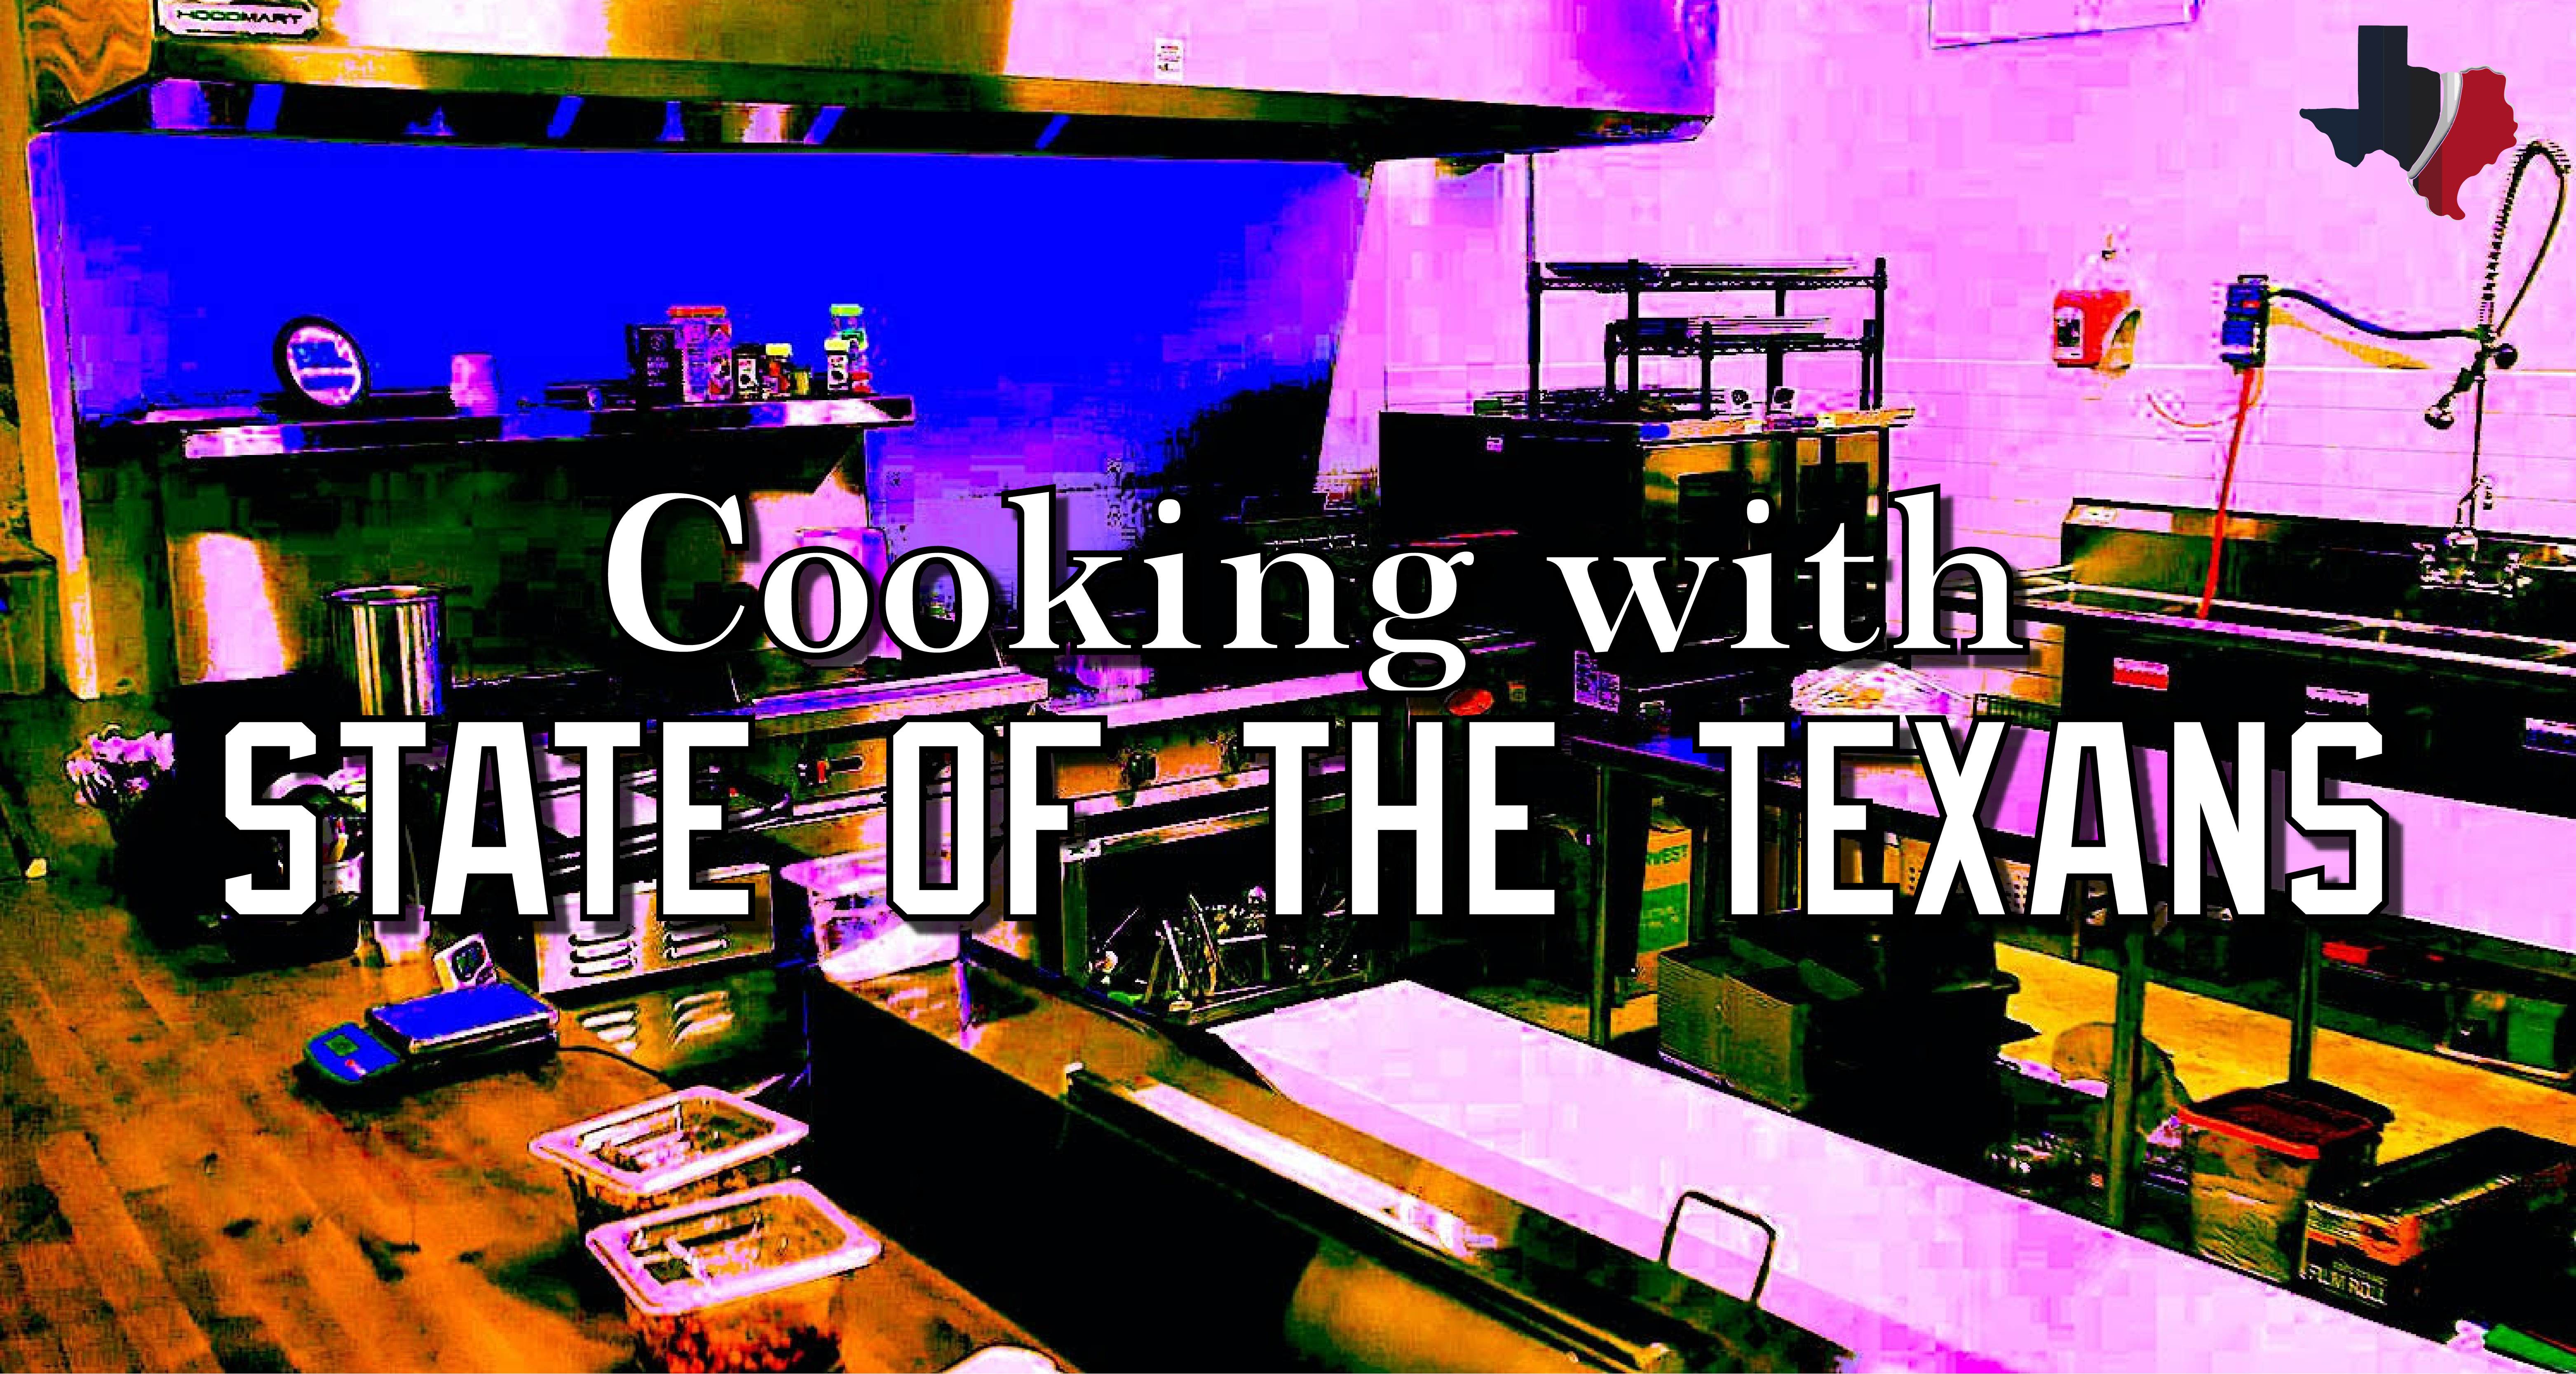 COOKINGWITH THE TEXANS - GRAPHIC